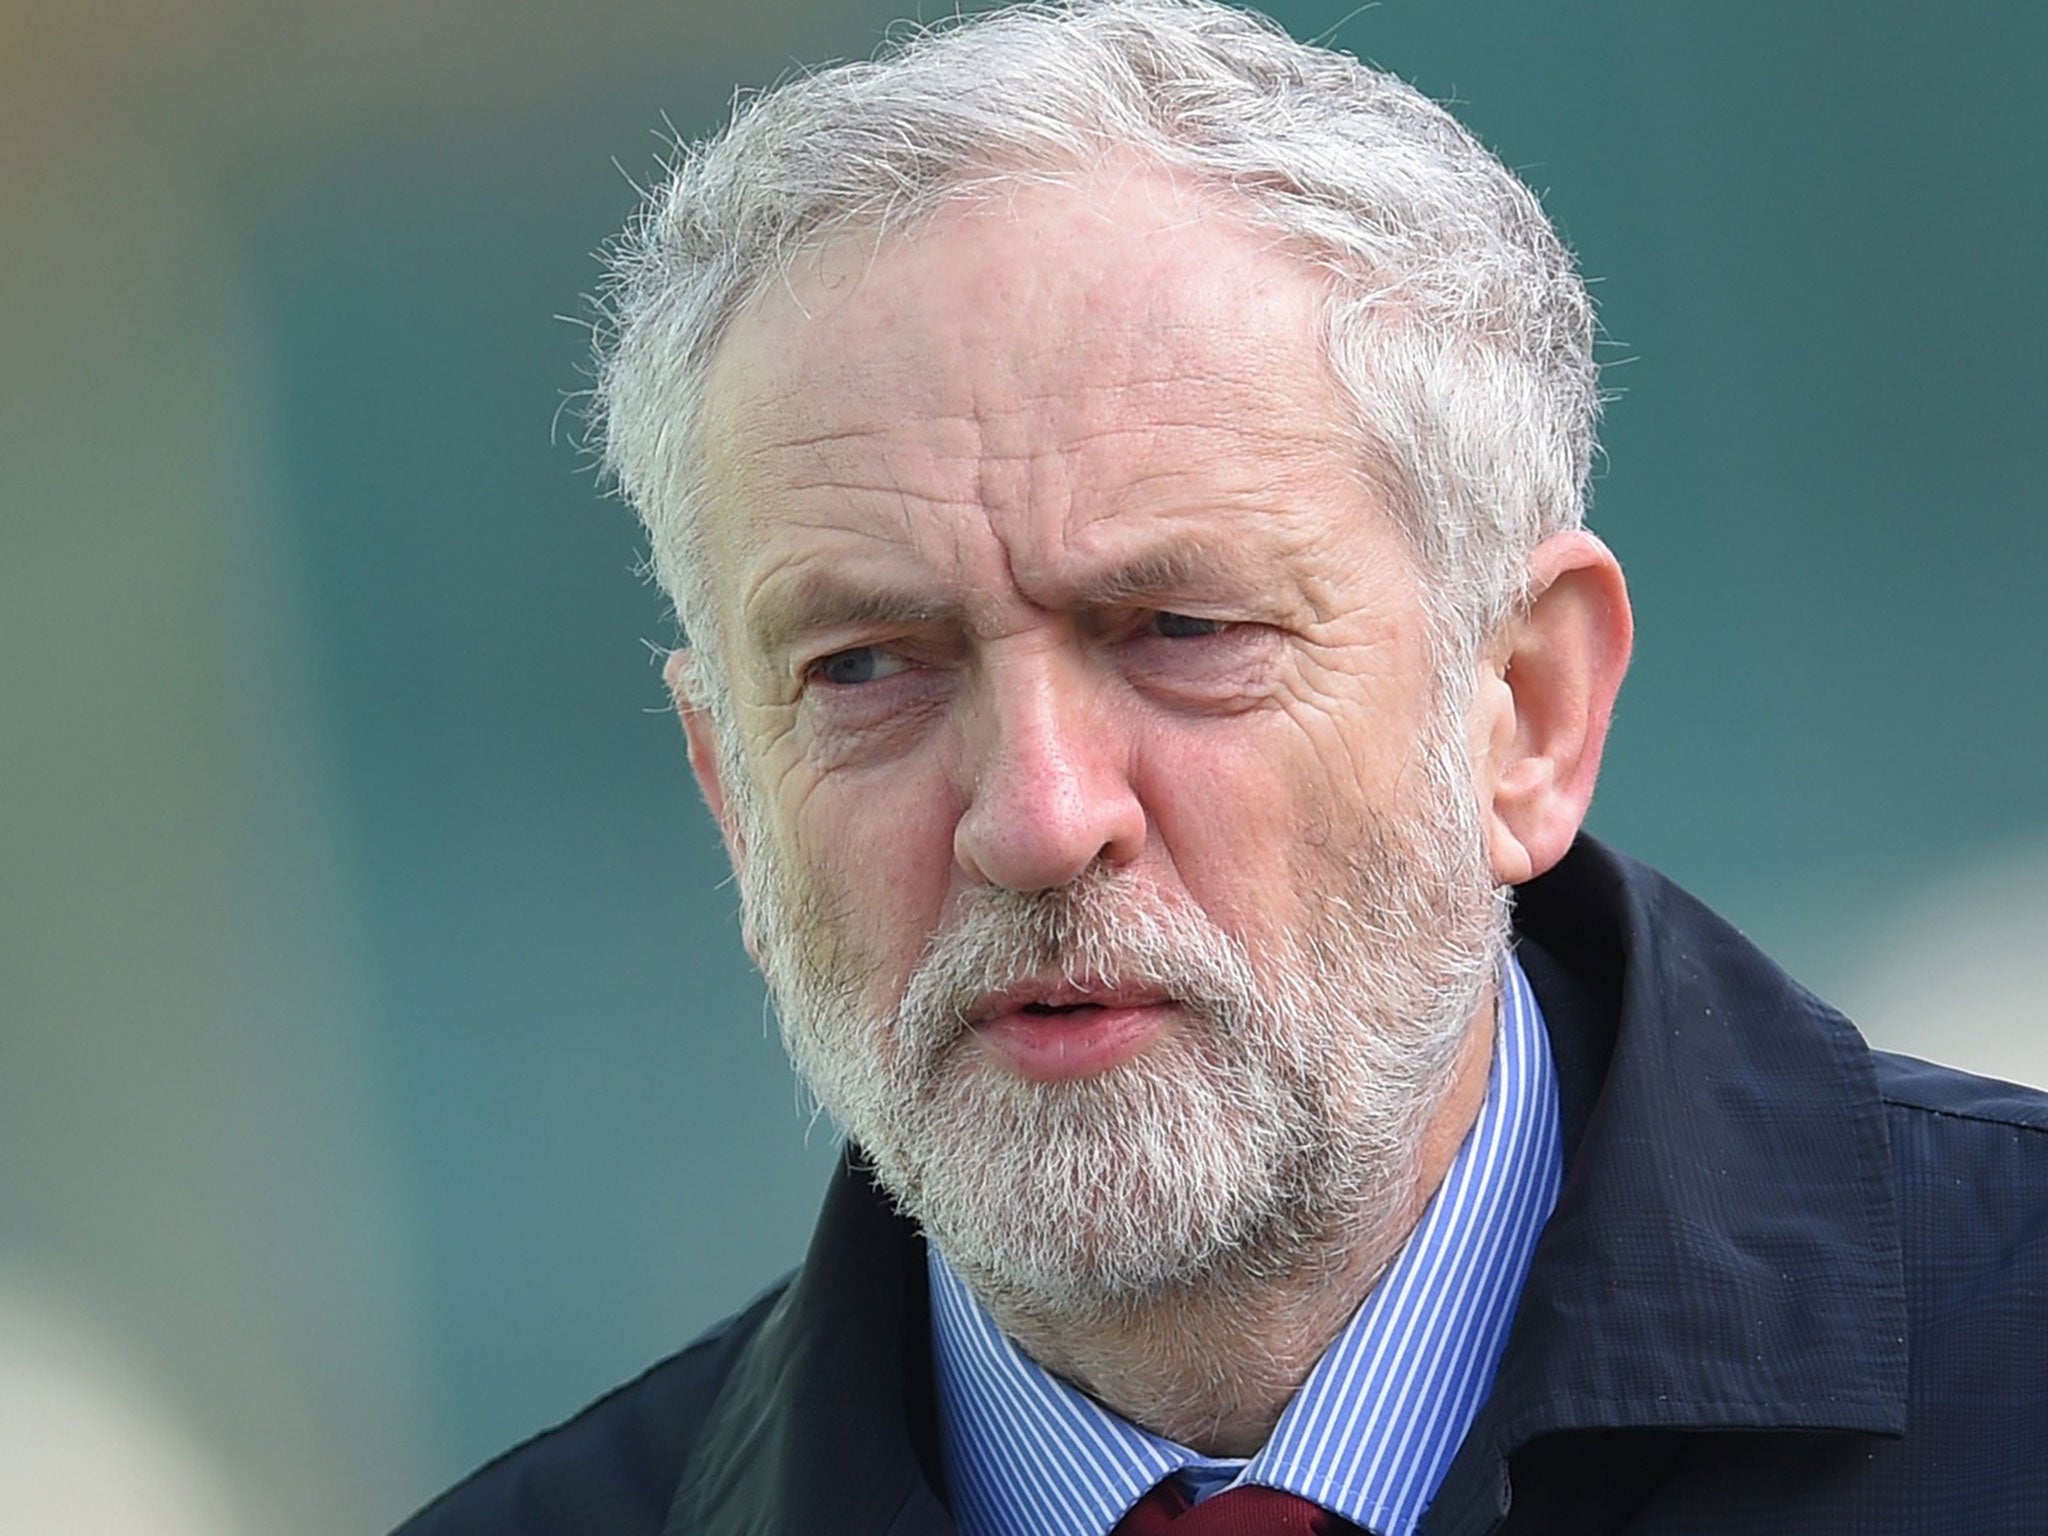 The Labour leader will join tens of thousands of people opposed to the renewal of Britain's nuclear submarines